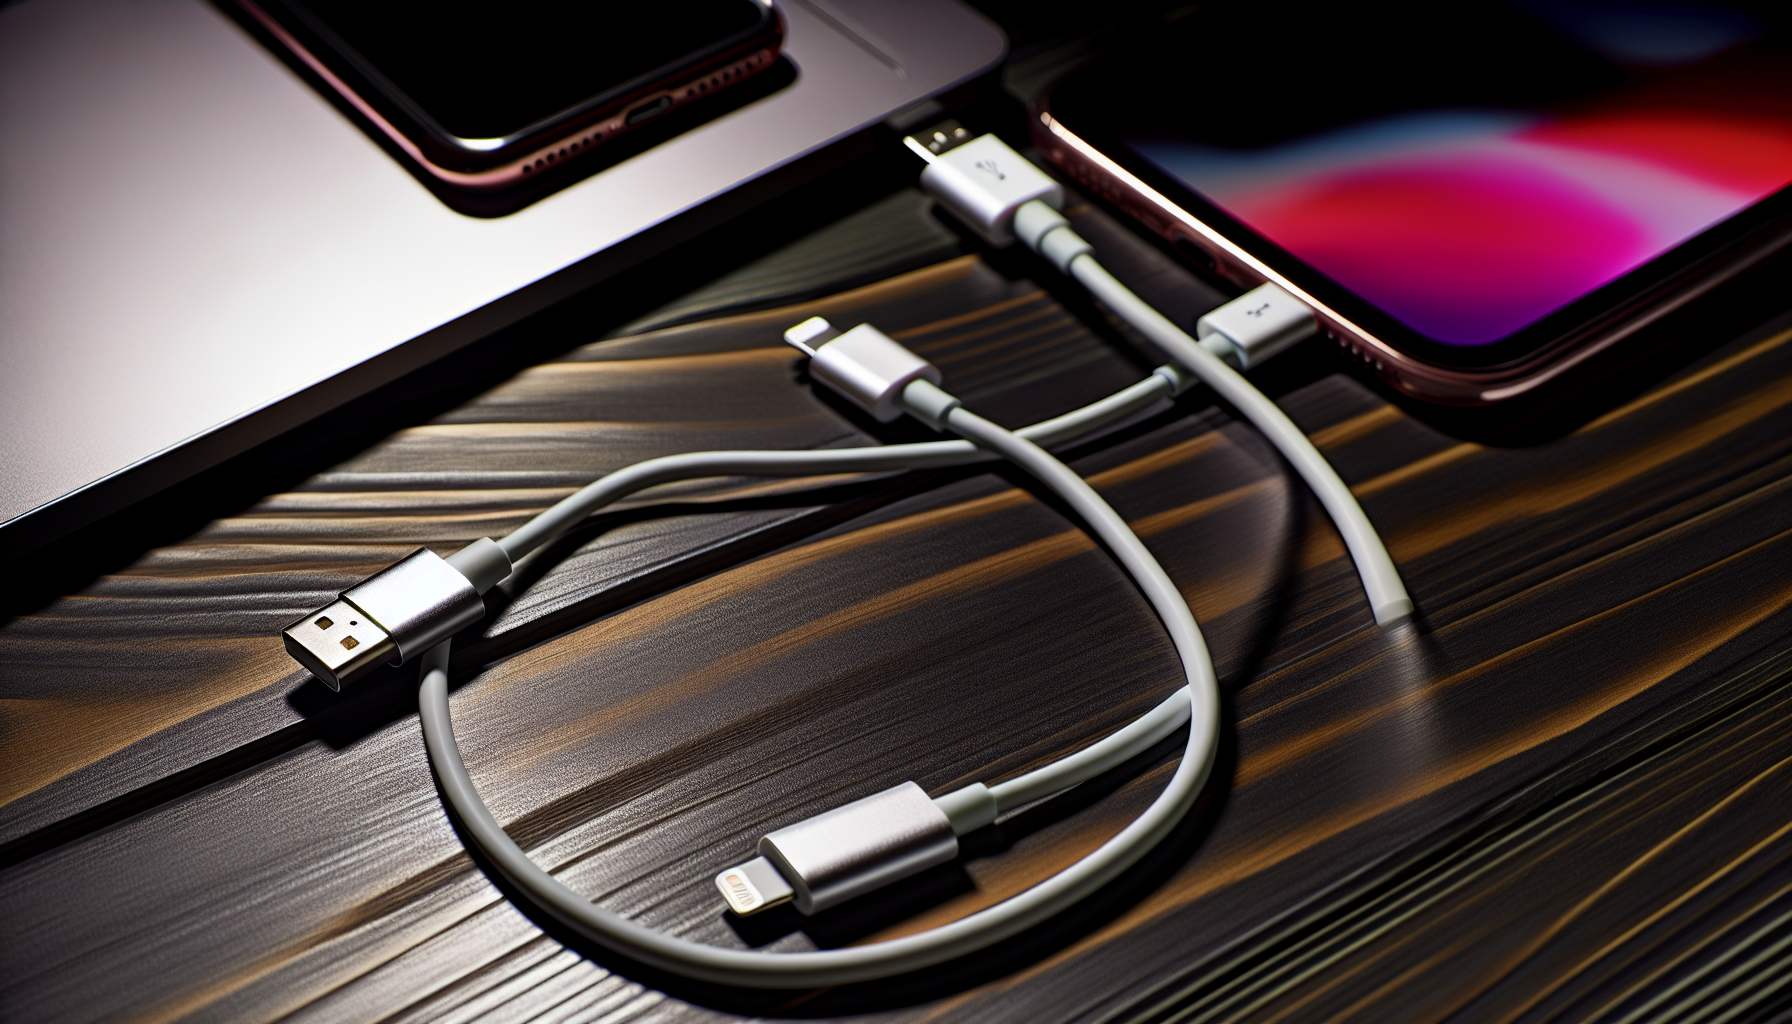 MFi-certified Lightning to USB C cable